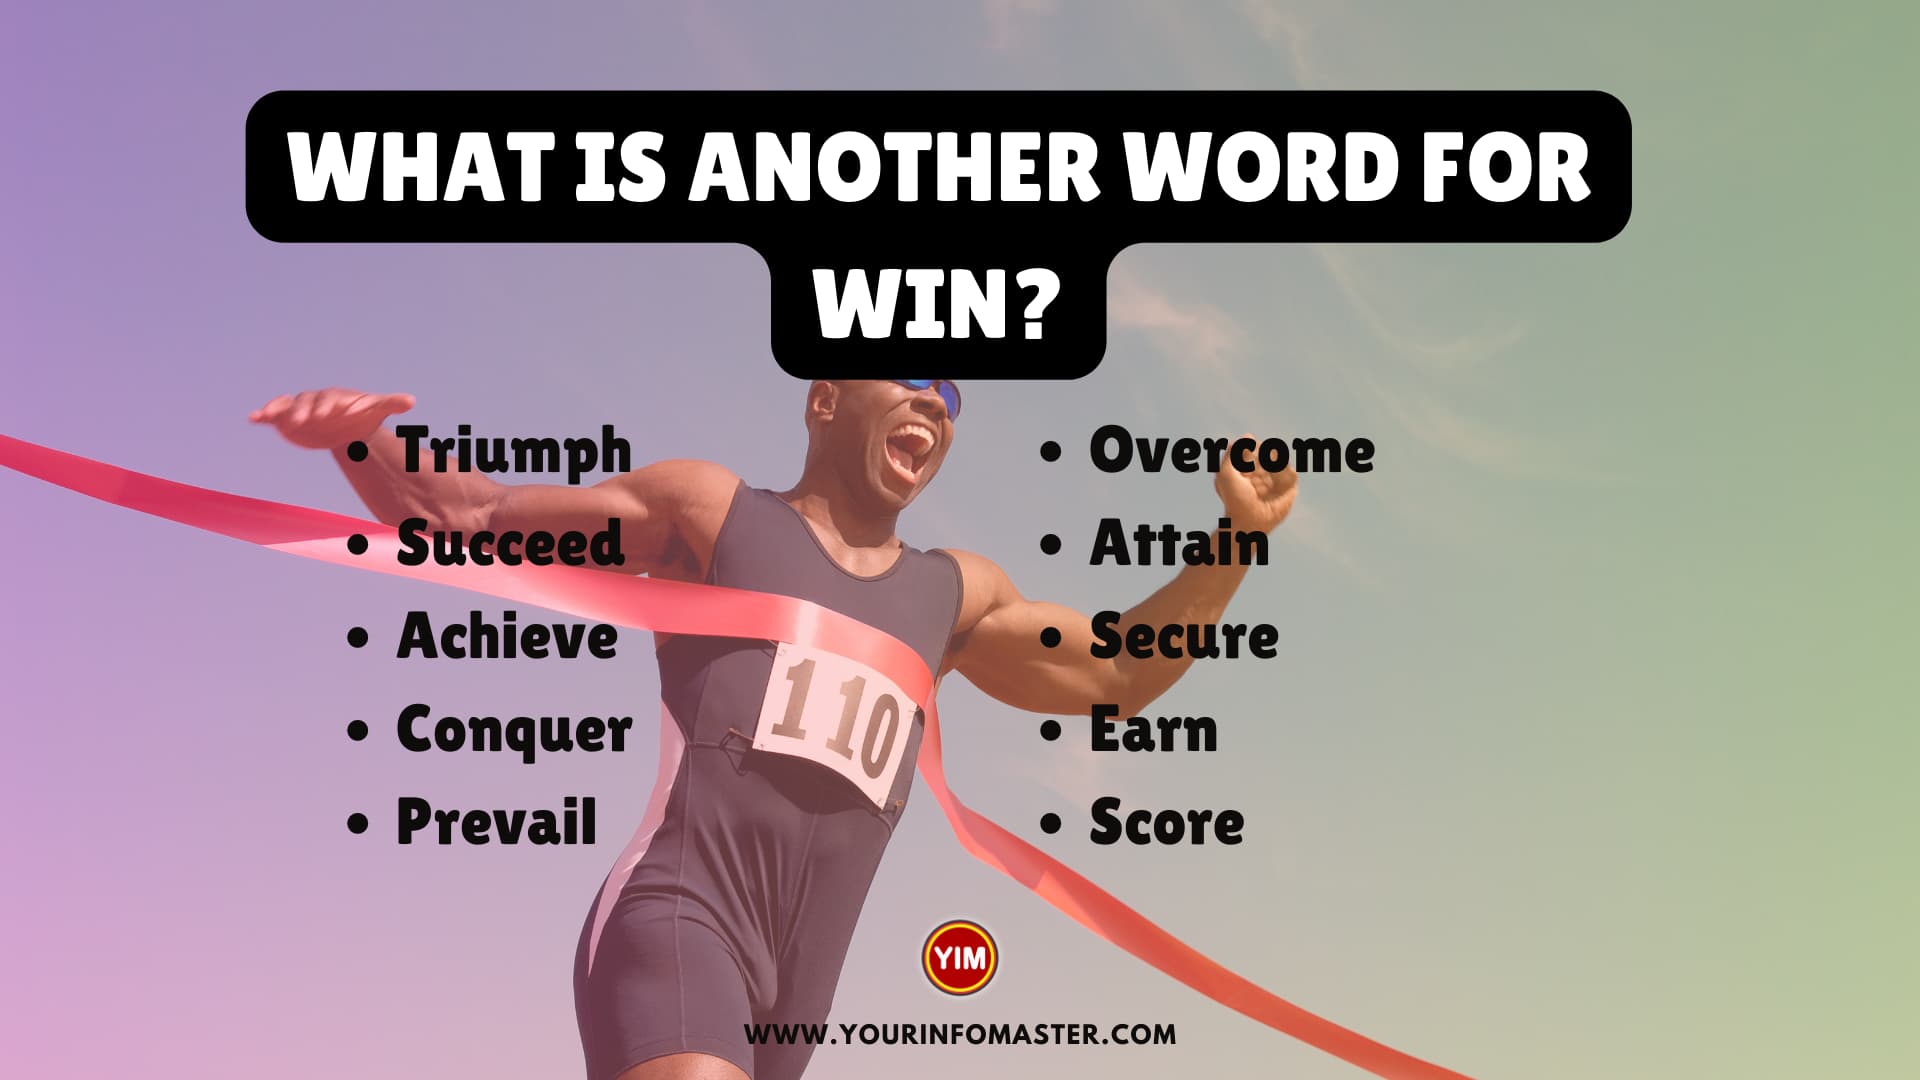 What is another word for Win